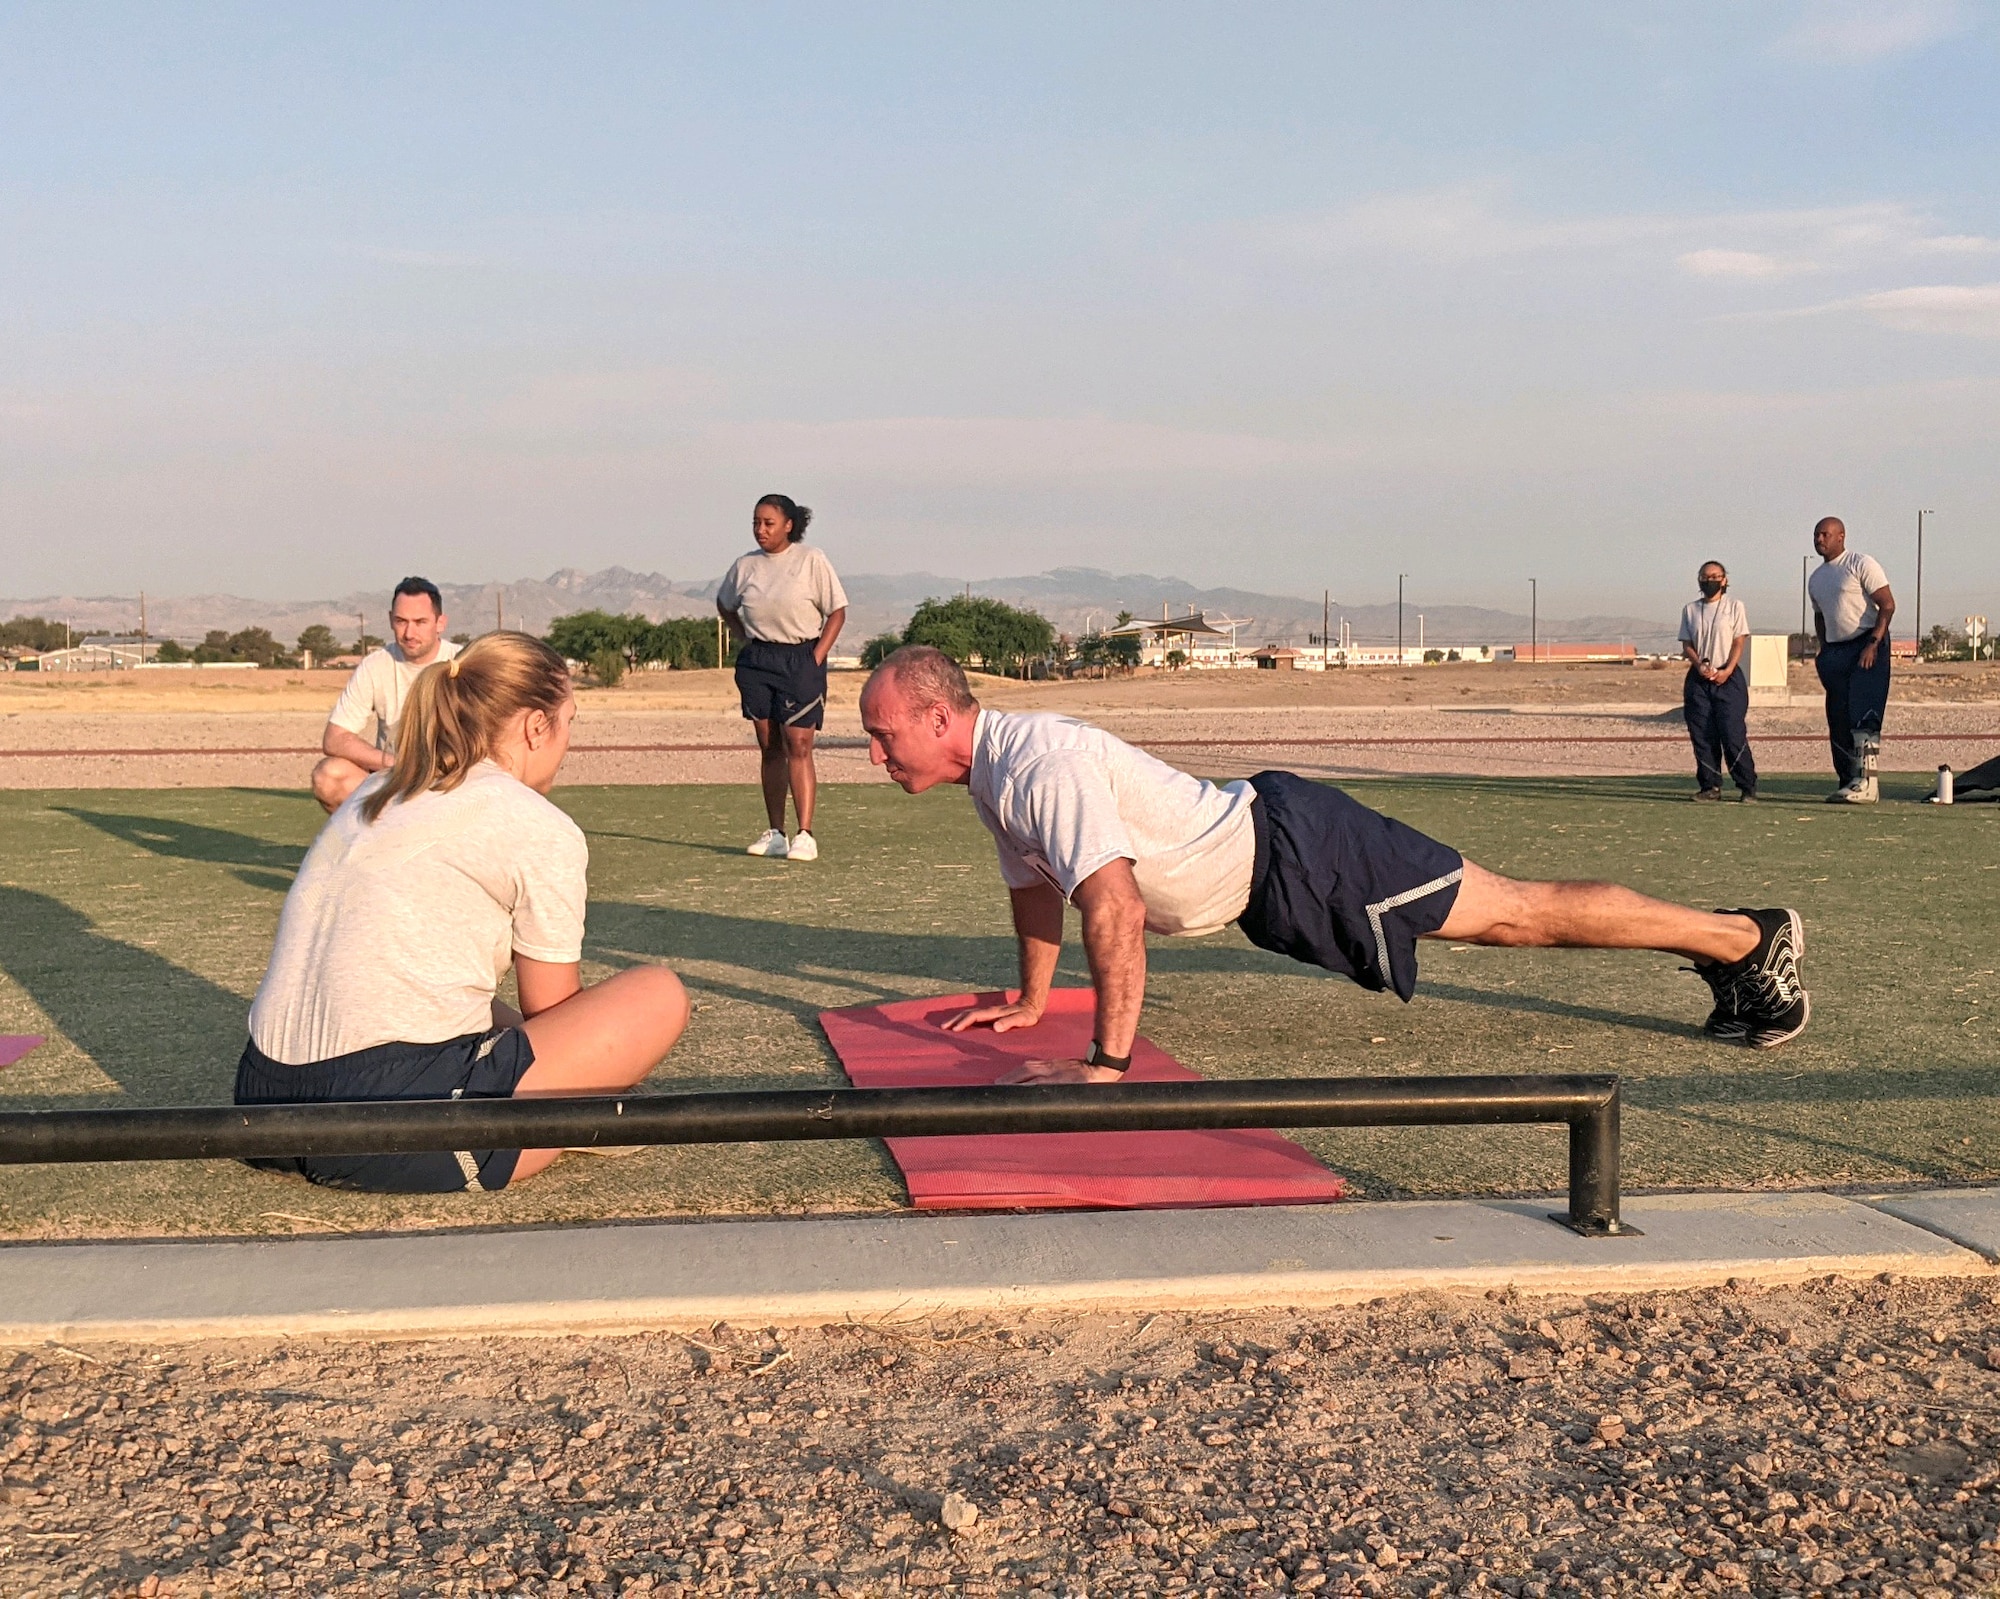 Maj. Mike Giaquinto, 926th Wing Public Affairs officer, performs a diagnostic physical fitness test, June 15, at Nellis Air Force Base, Nevada. (U.S. Air Force photo by Dan Mena)